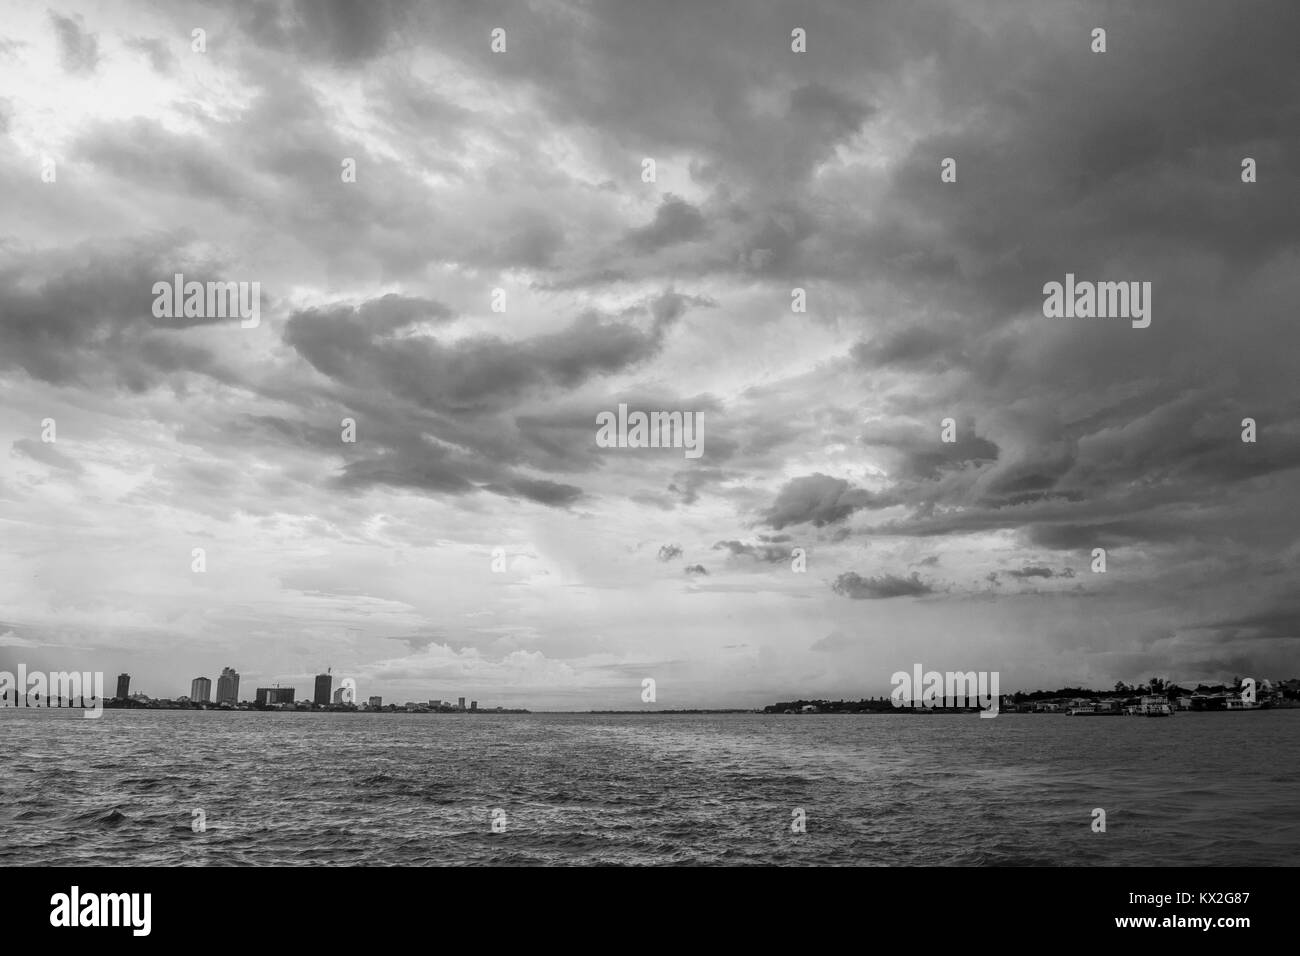 Where the Mekong meets Tonle Sap, river banks in Phnom Penh Cambodia, South East Asia, brown river water, grey thick cloud cover of monsoon season. Stock Photo